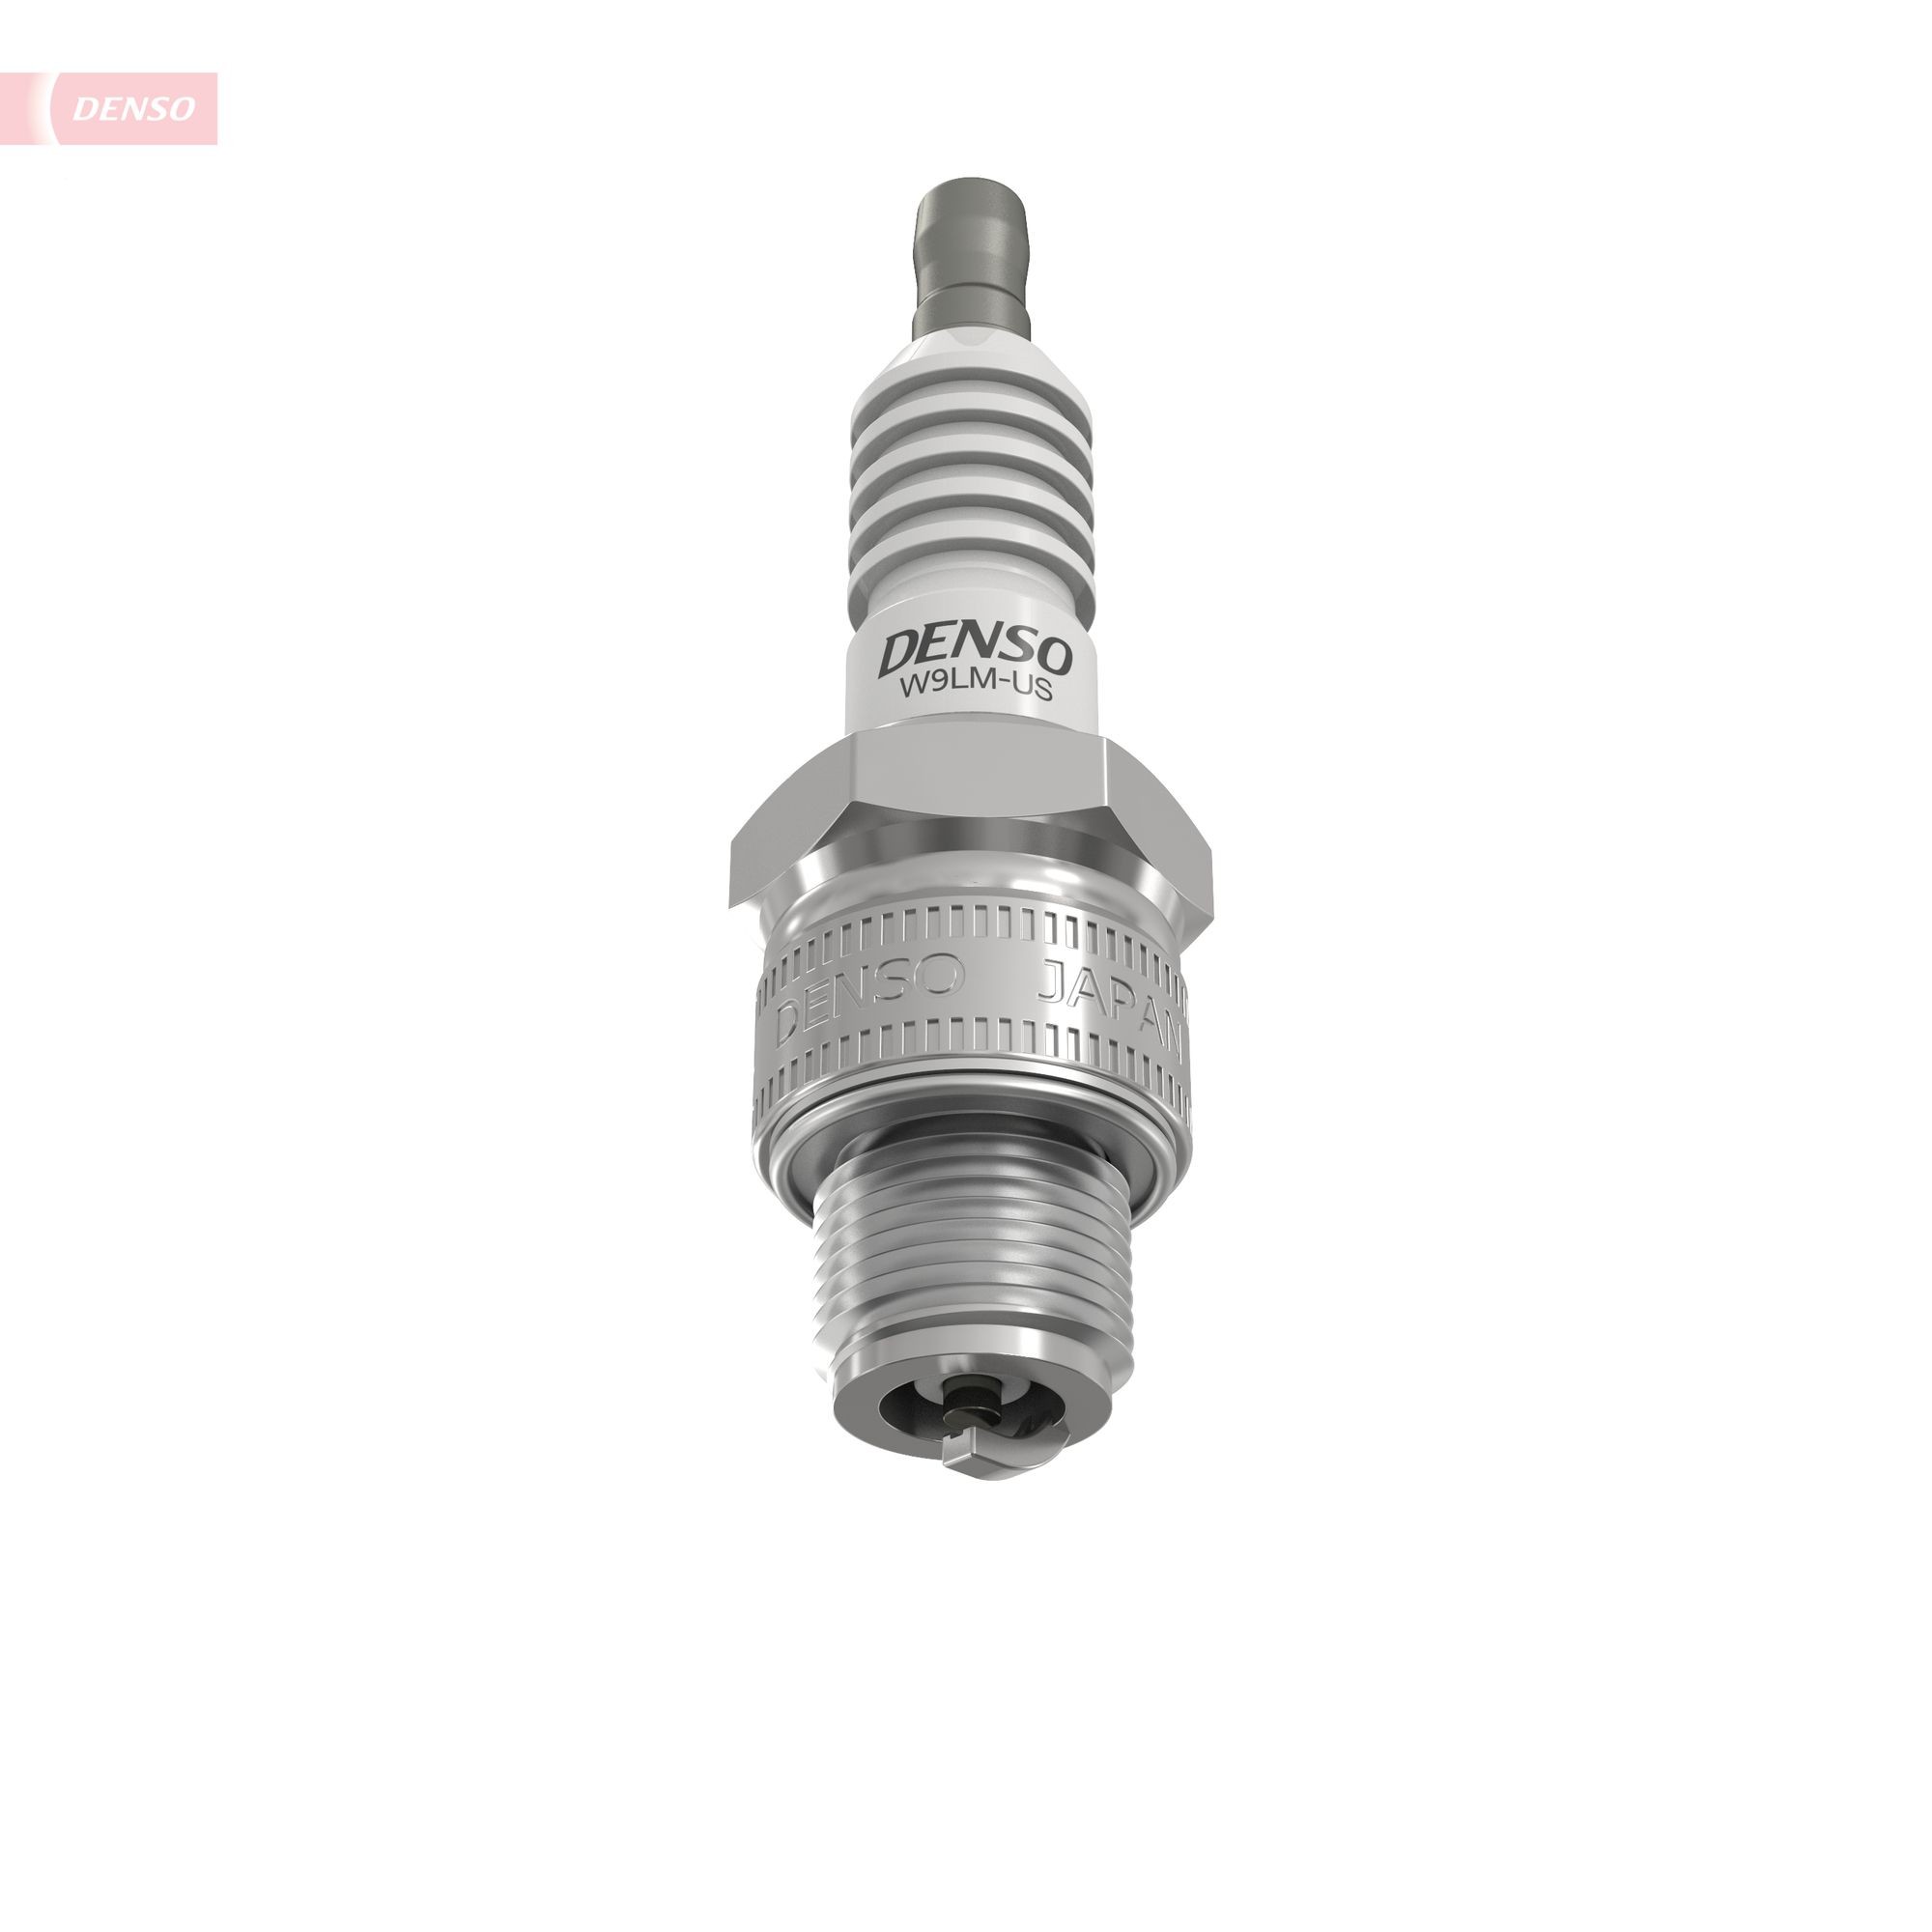 W9LMUS Spark plug DENSO W9LM-US review and test